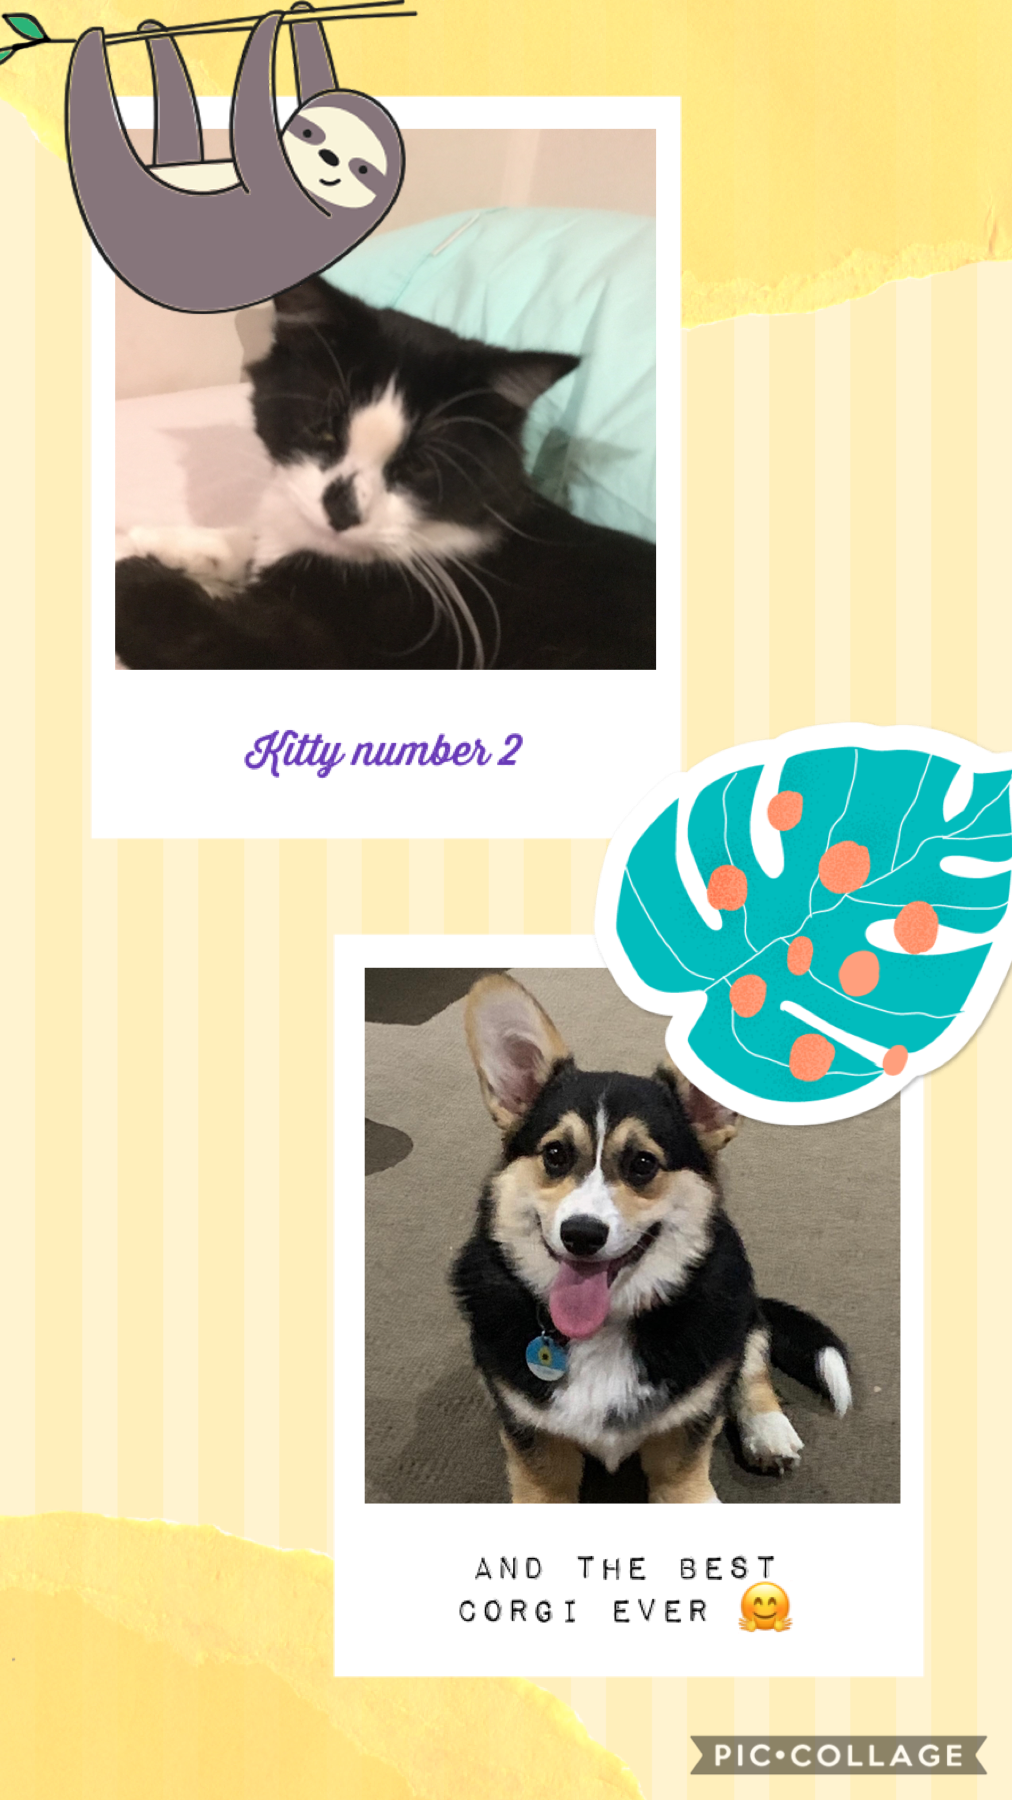 Today we have the corgi snd the kitty enjoy 
If we get 5 followers I’ll give an age reveal